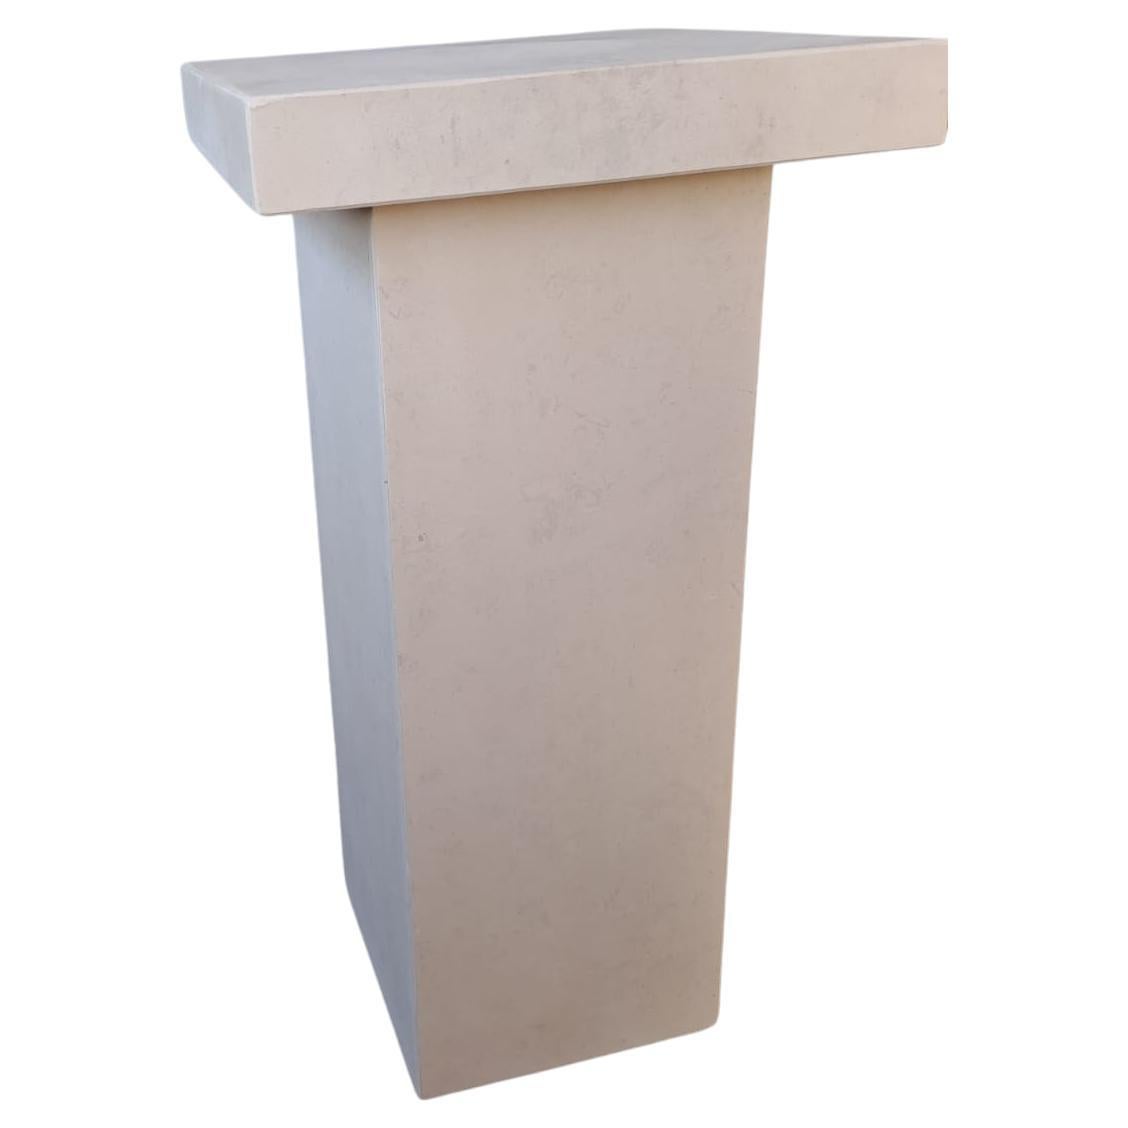 Introducing a pedestal that marries classical elegance with the raw beauty of nature: our Limestone Pedestal. This remarkable piece of artistry is meticulously handcrafted from high-quality limestone, designed to enhance and elevate your living